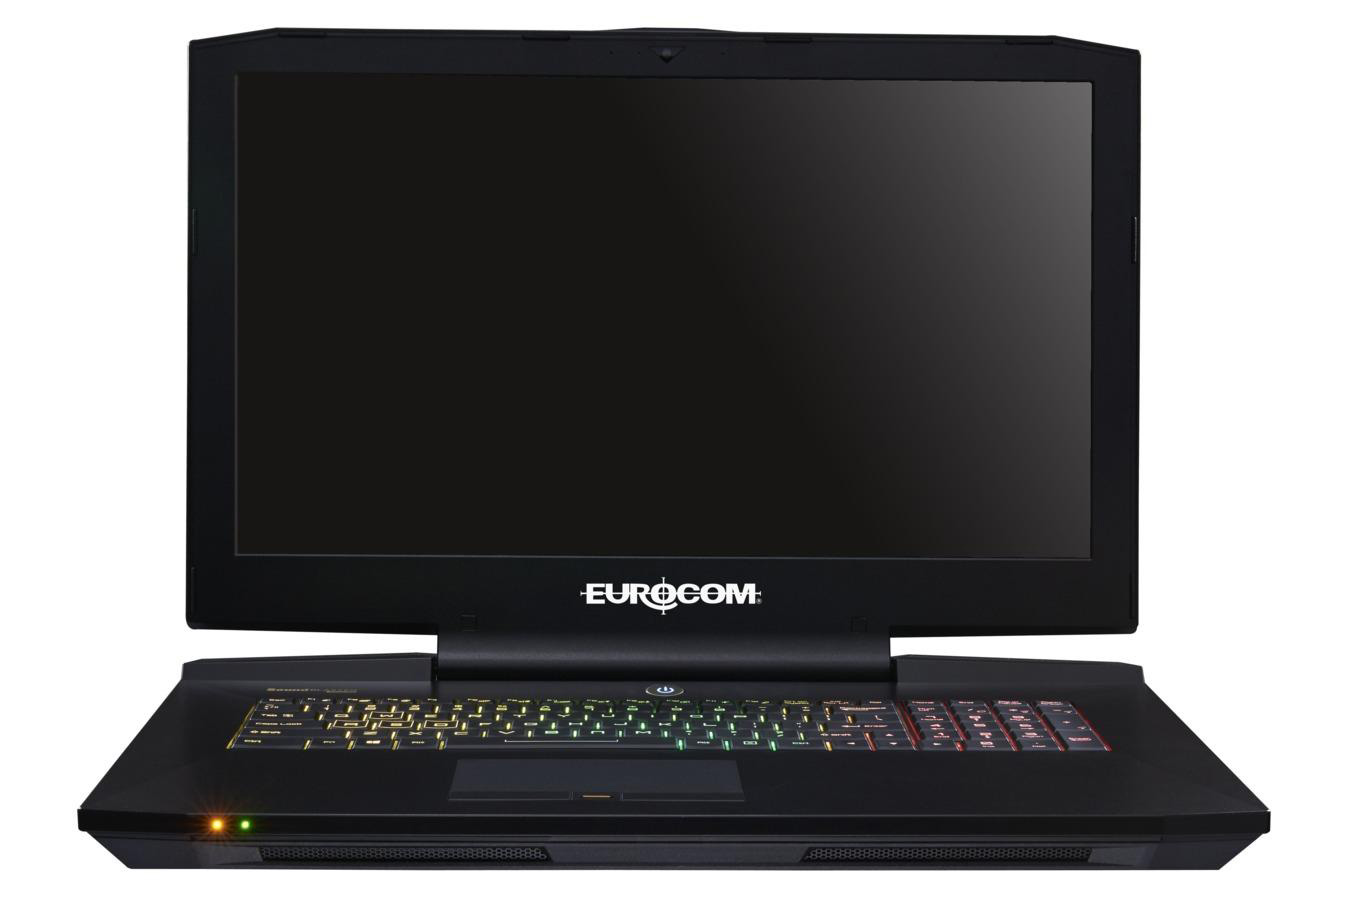 eurocoms x9 is the latest laptop with desktop hardware front